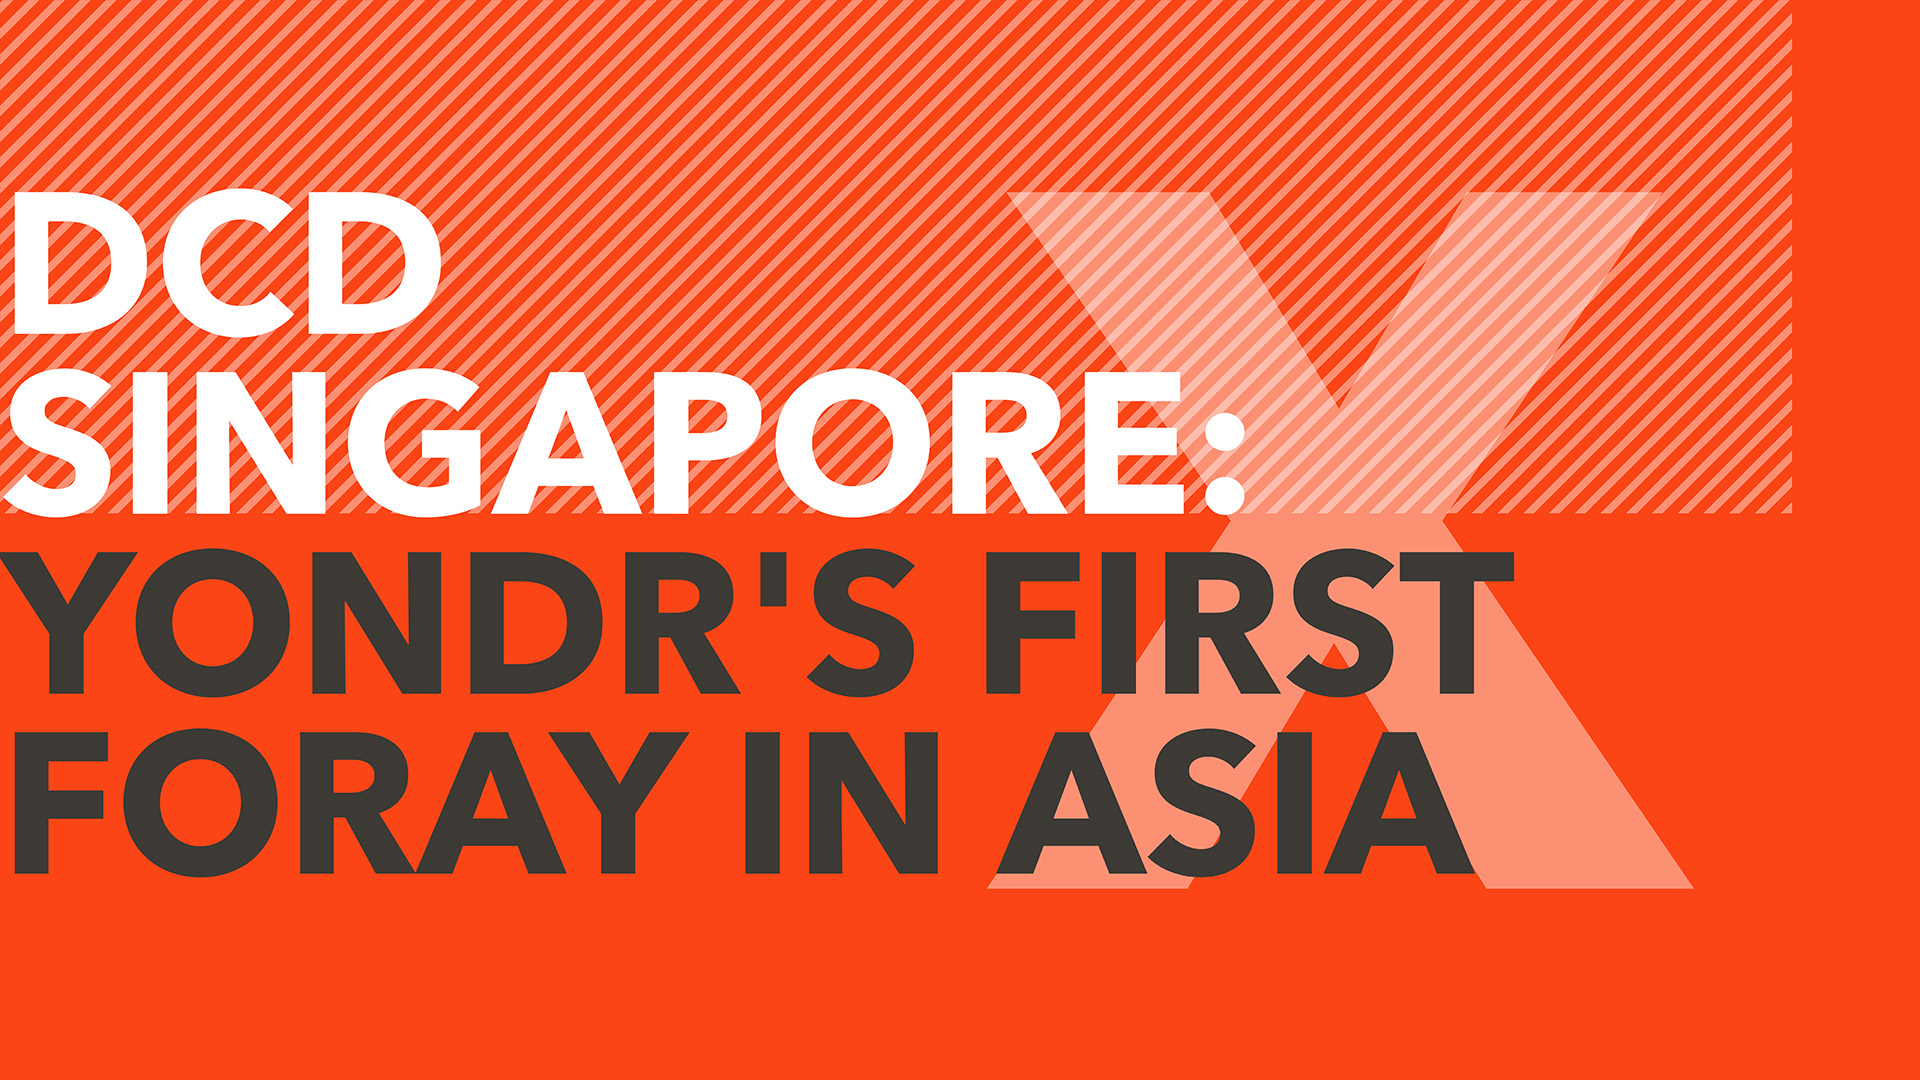 DCD Singapore: Yondr’s first foray in Asia